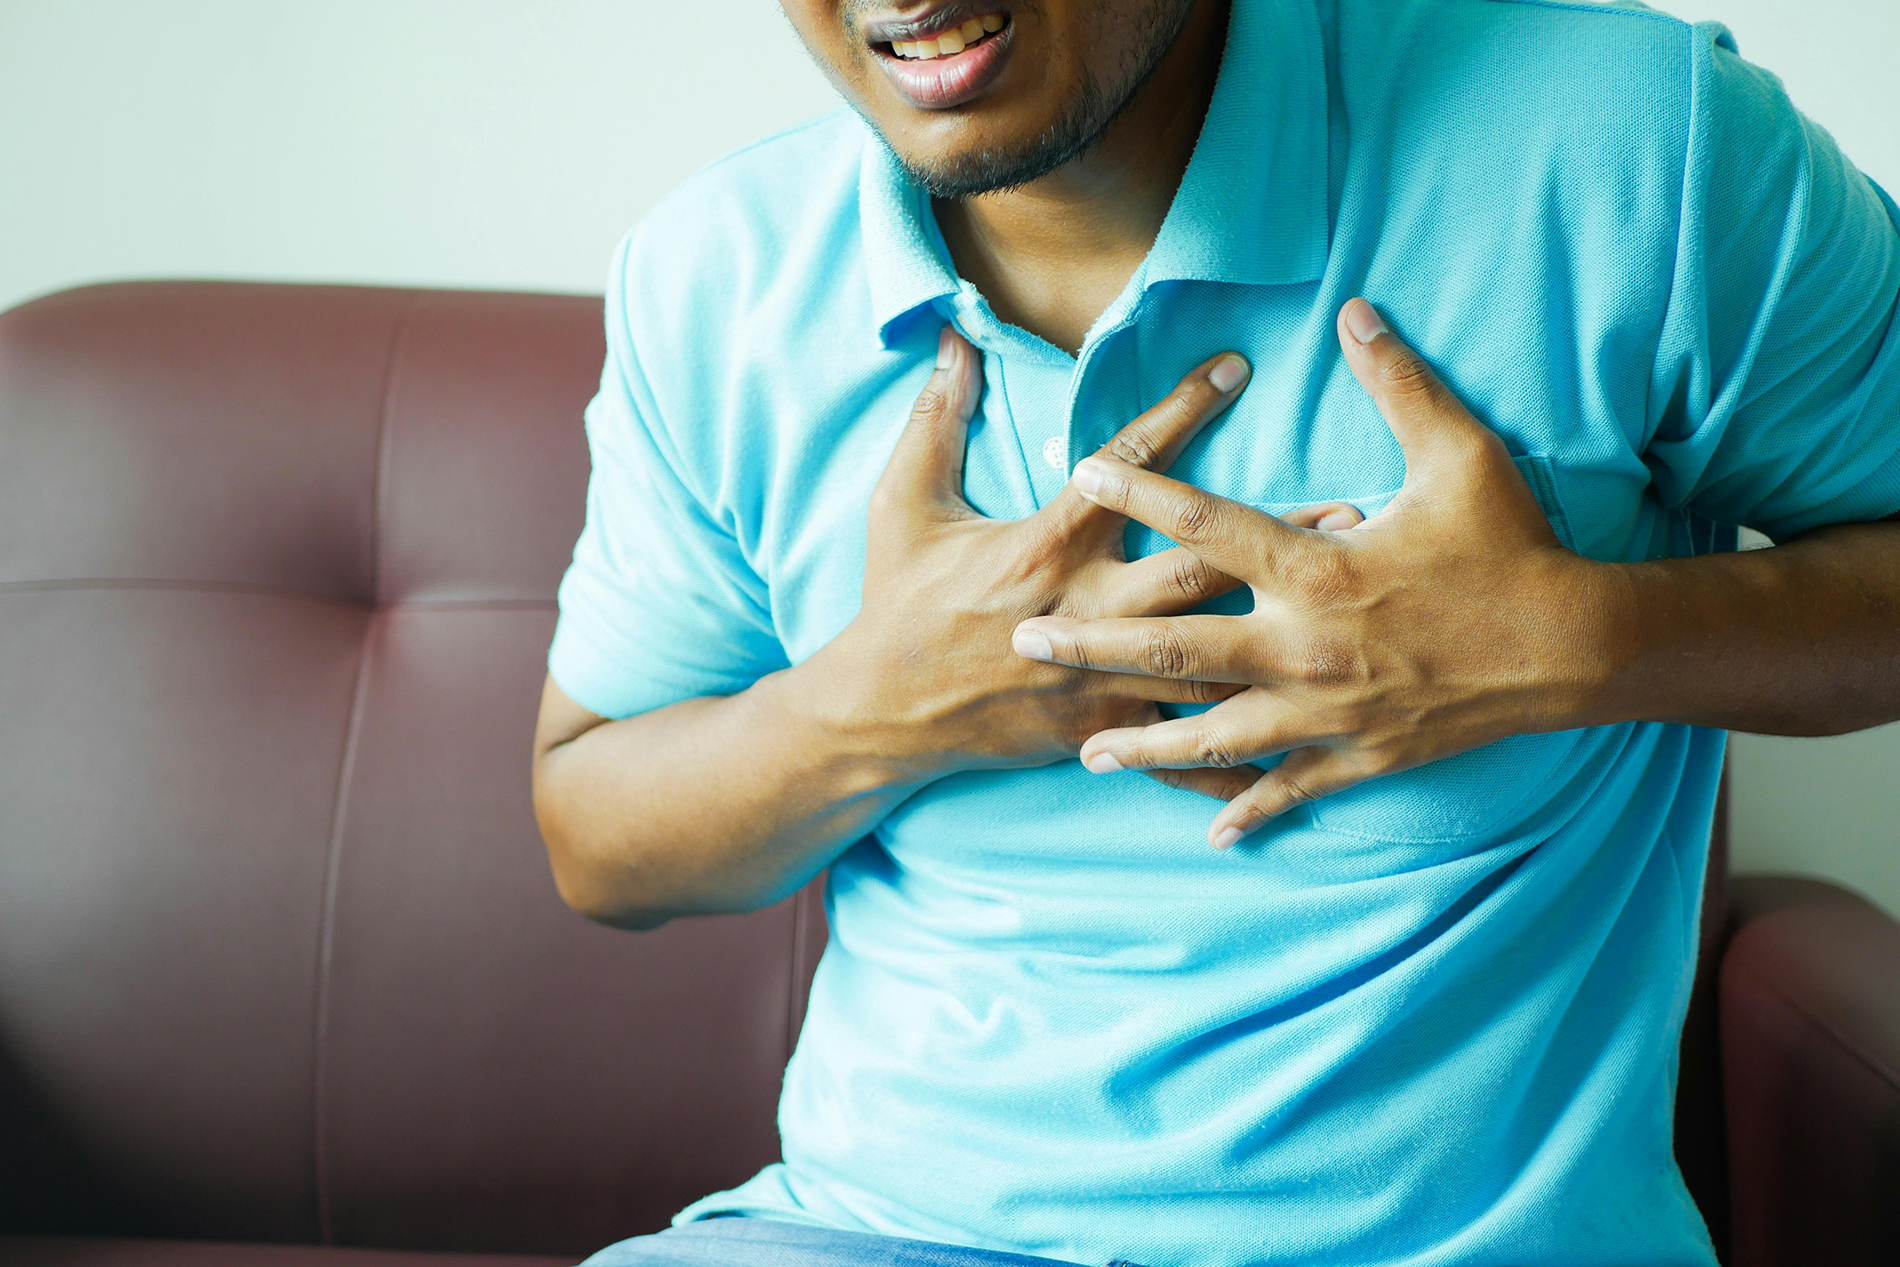 Can Anxiety Cause Chest Pain?